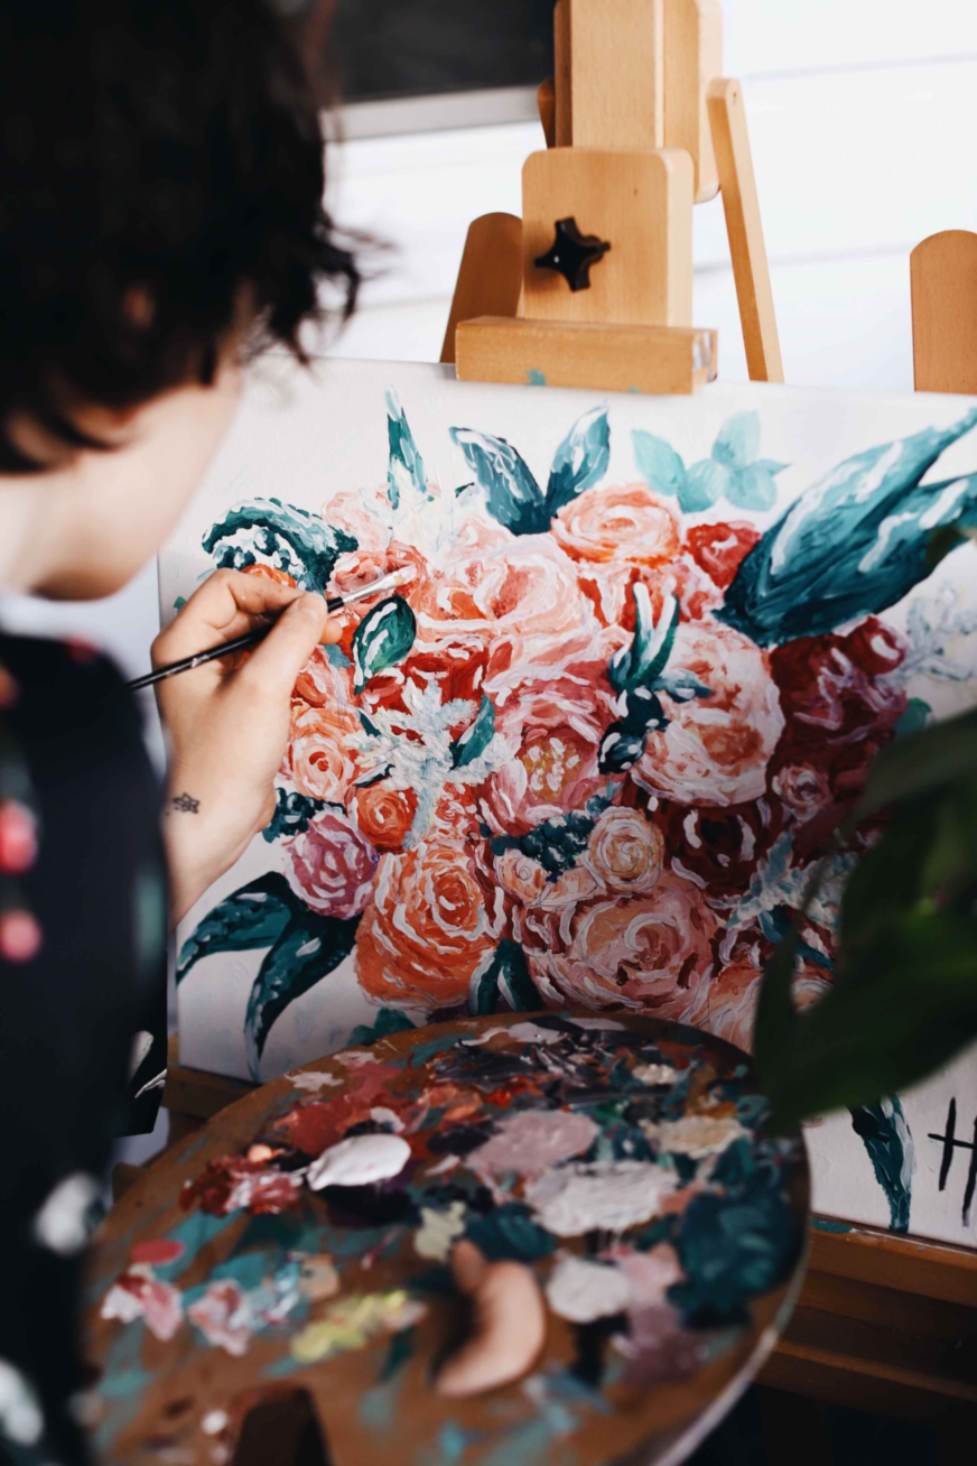 A person painting flowers on a canvas